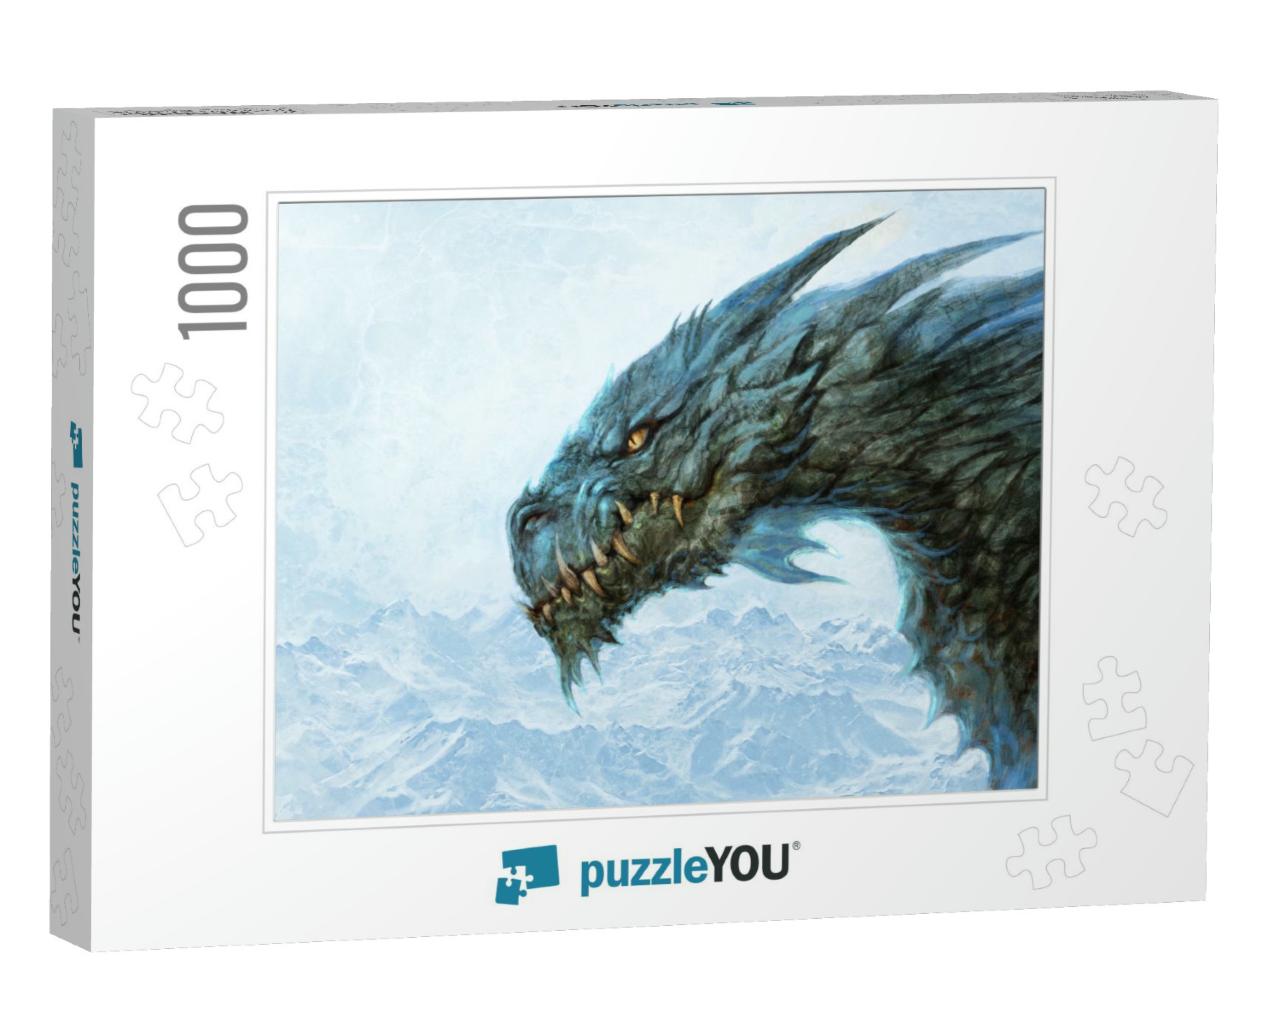 Fierce Ice Dragon - Digital Illustration... Jigsaw Puzzle with 1000 pieces